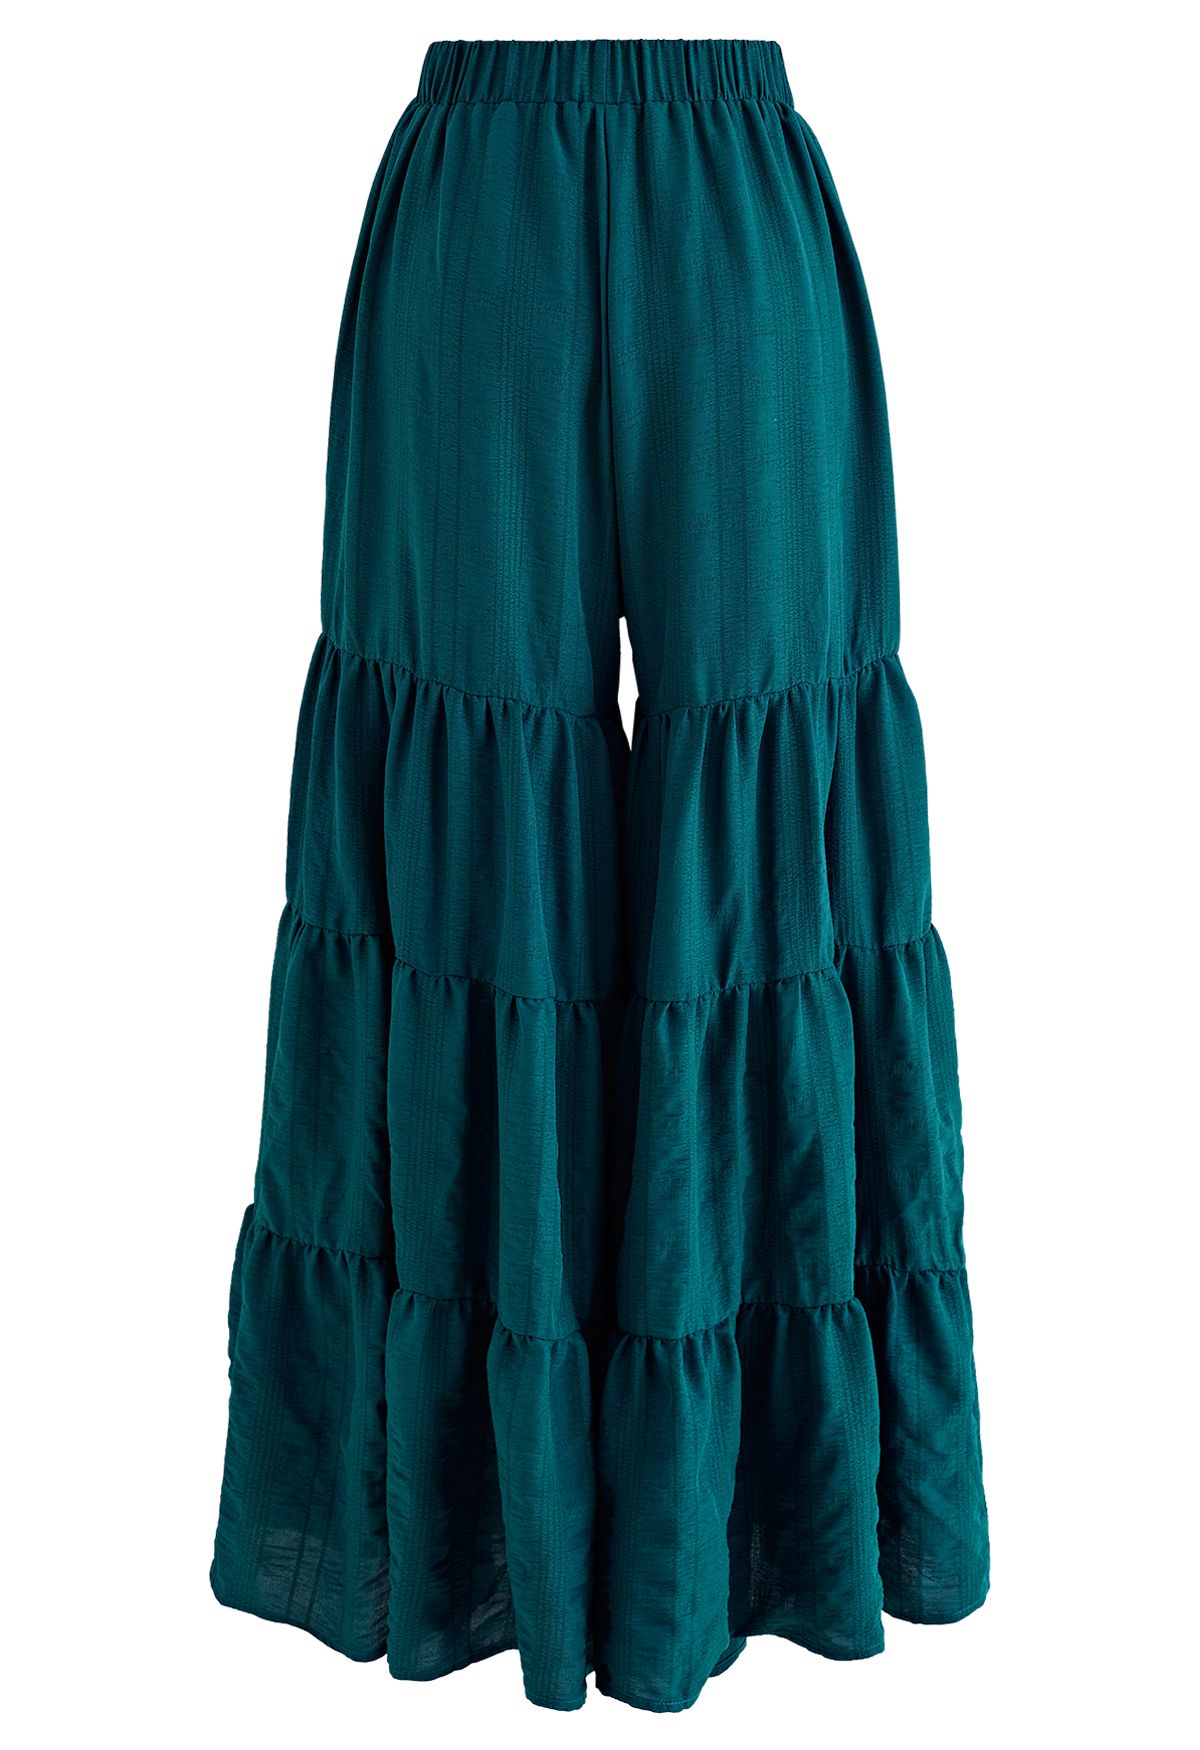 Sunny Days Wide-Leg Pants in Emerald